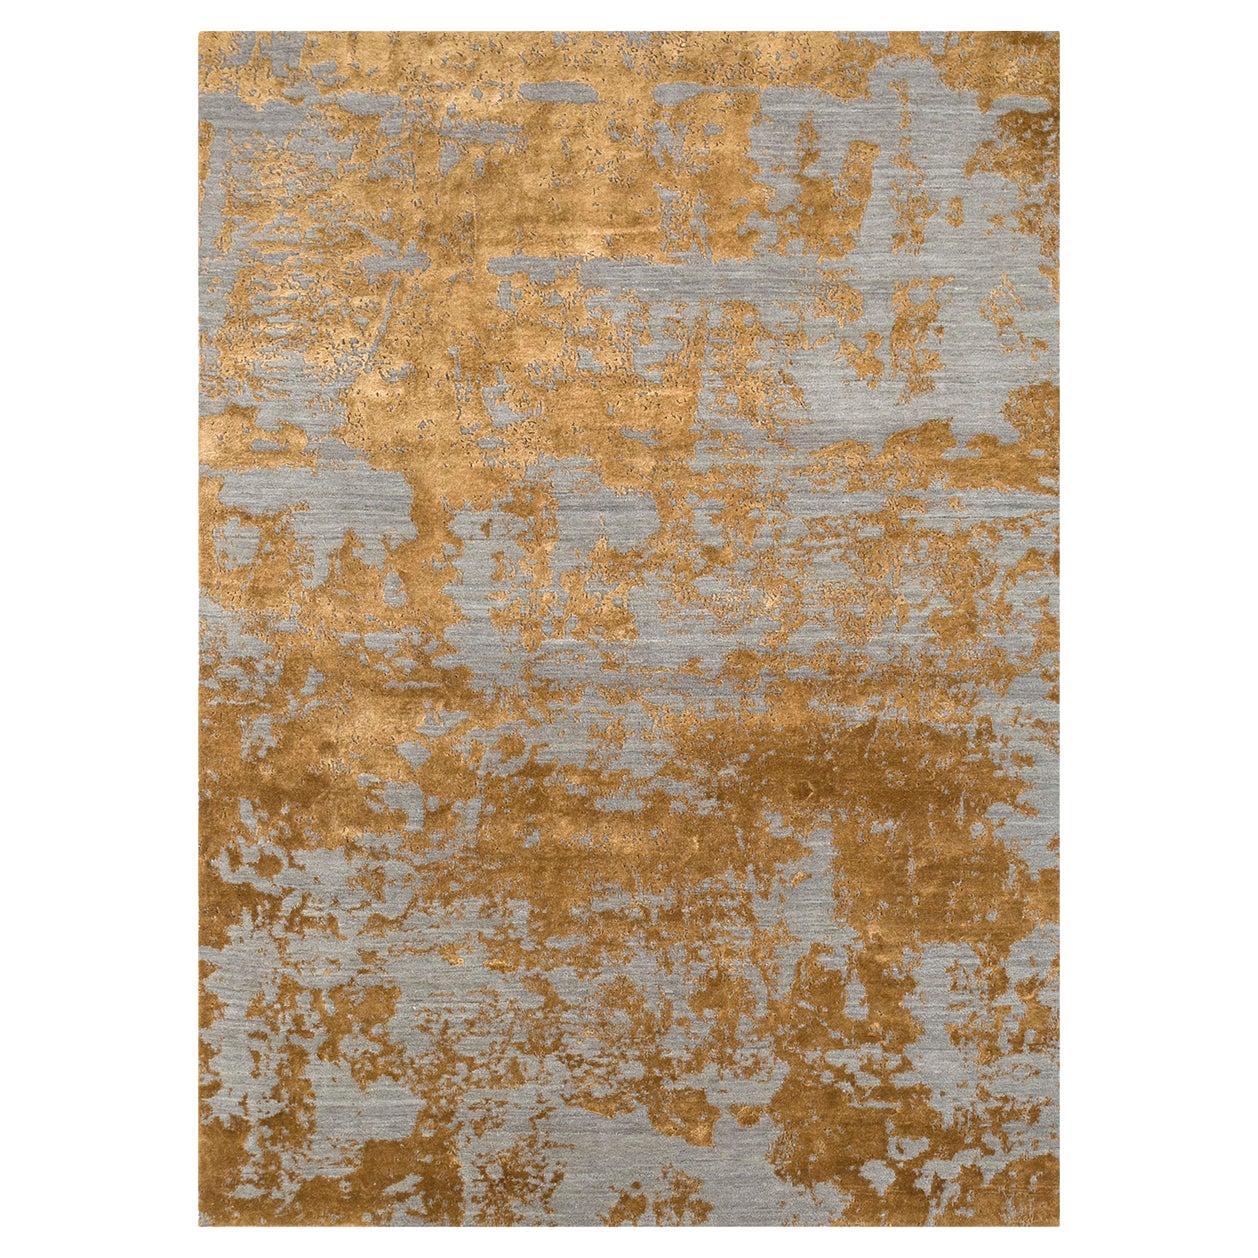 Flake Rug by Rural Weavers, Knotted, Wool, Bamboo Silk, 270x360cm For Sale